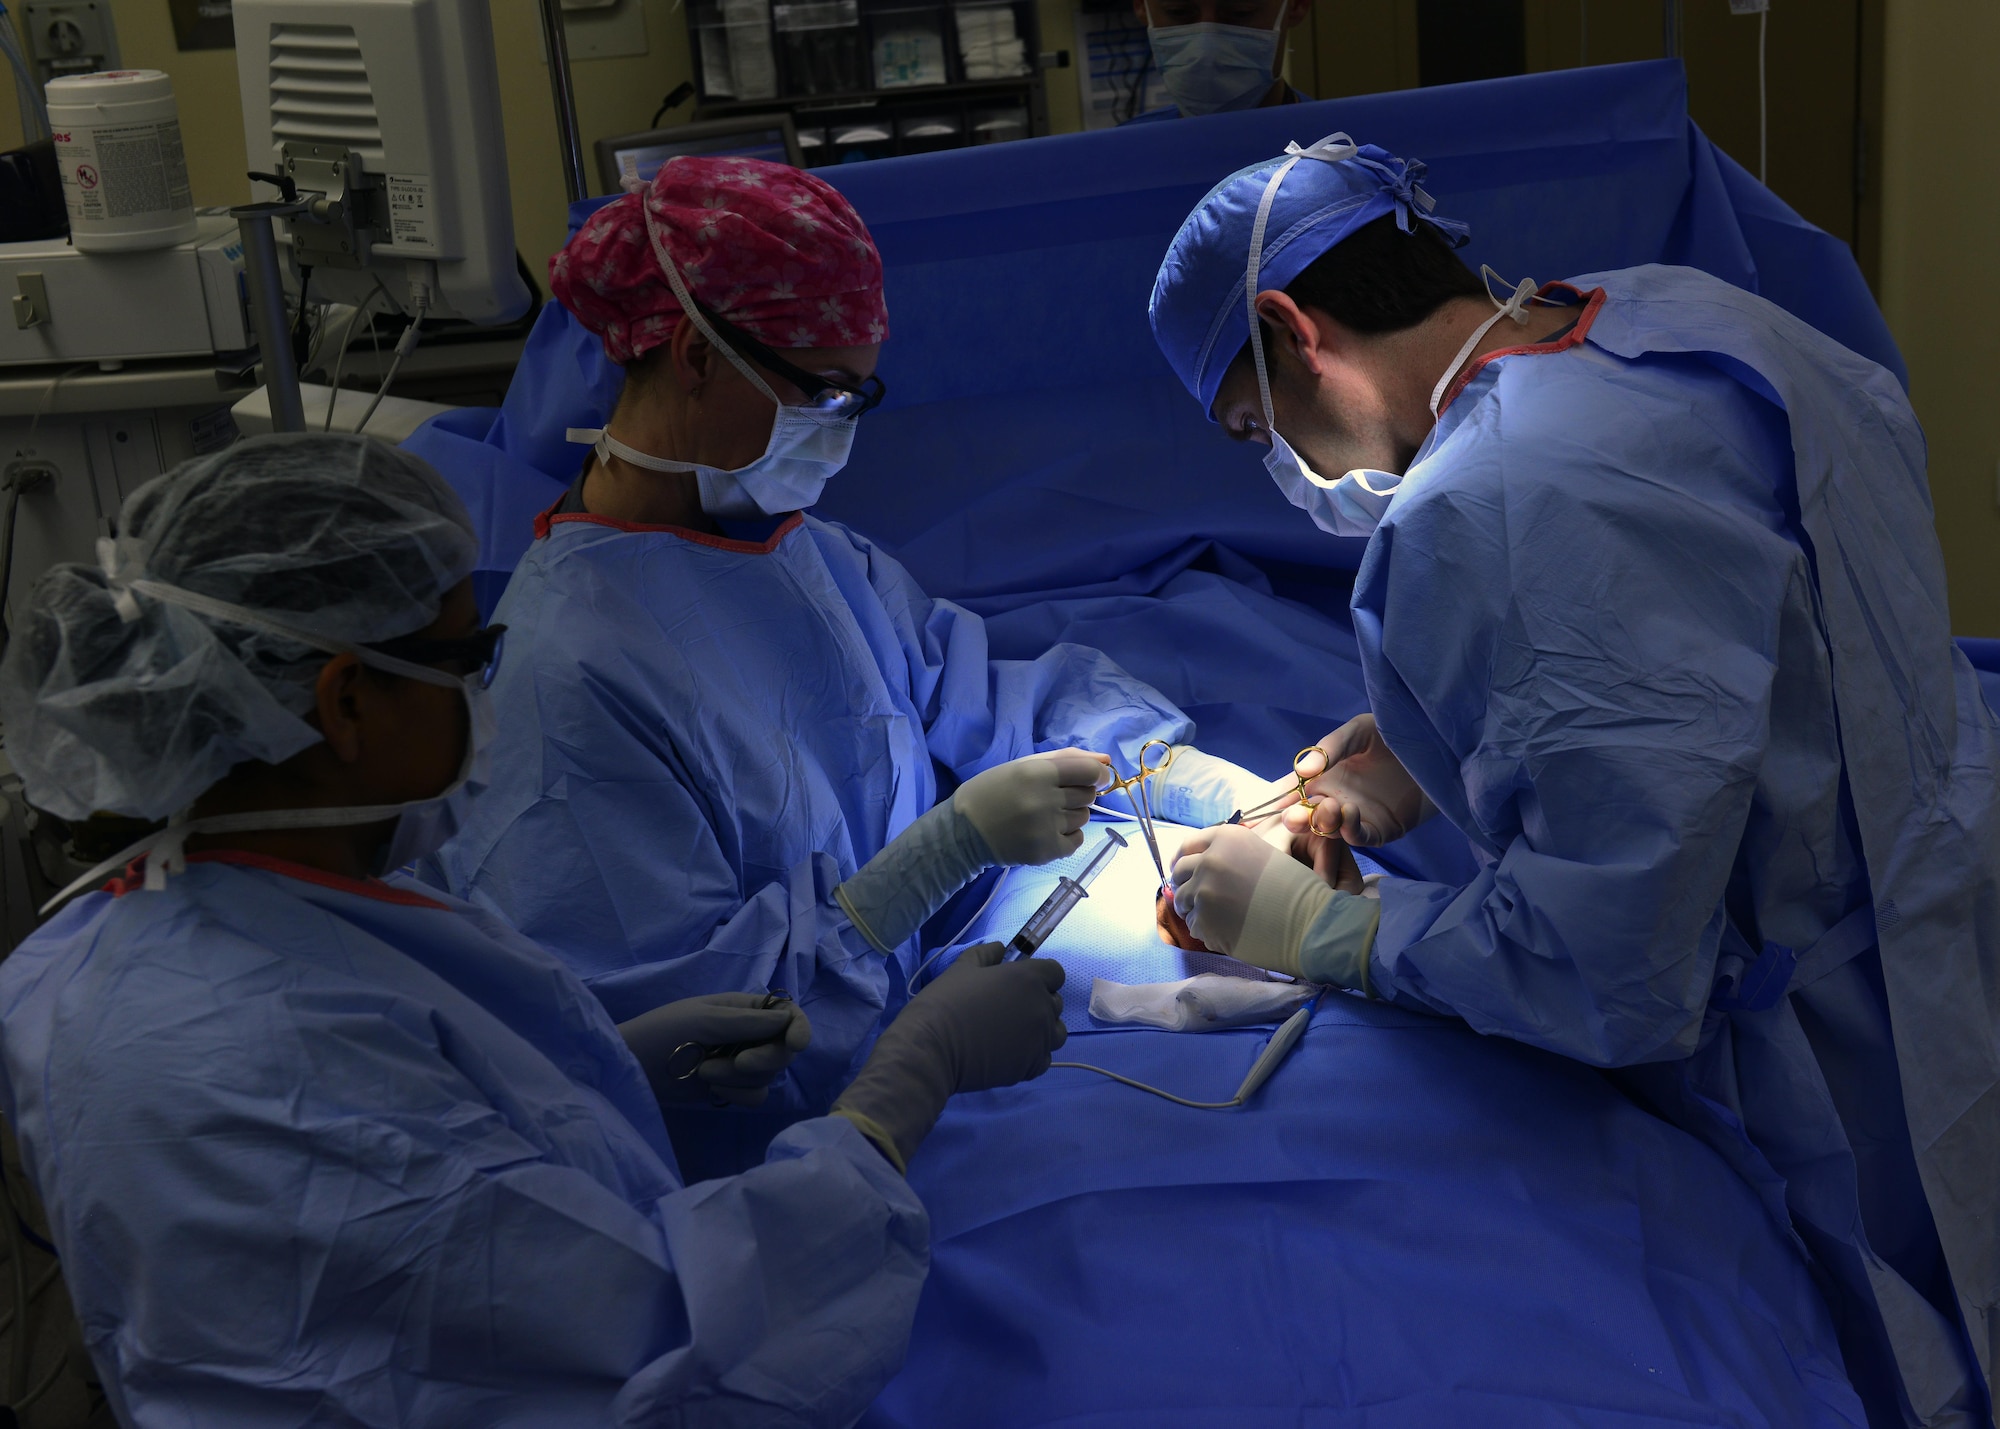 A 31st Surgical Operations Squadron surgical team performs minor surgery on a patient March 4, 2015, at Aviano Air base, Italy. The 31st SGOS offers surgical specialty care in support of the primary care mission to ensure a deployable fighting force. (U.S. Air Force photo/Airman 1st Class Ryan Conroy)